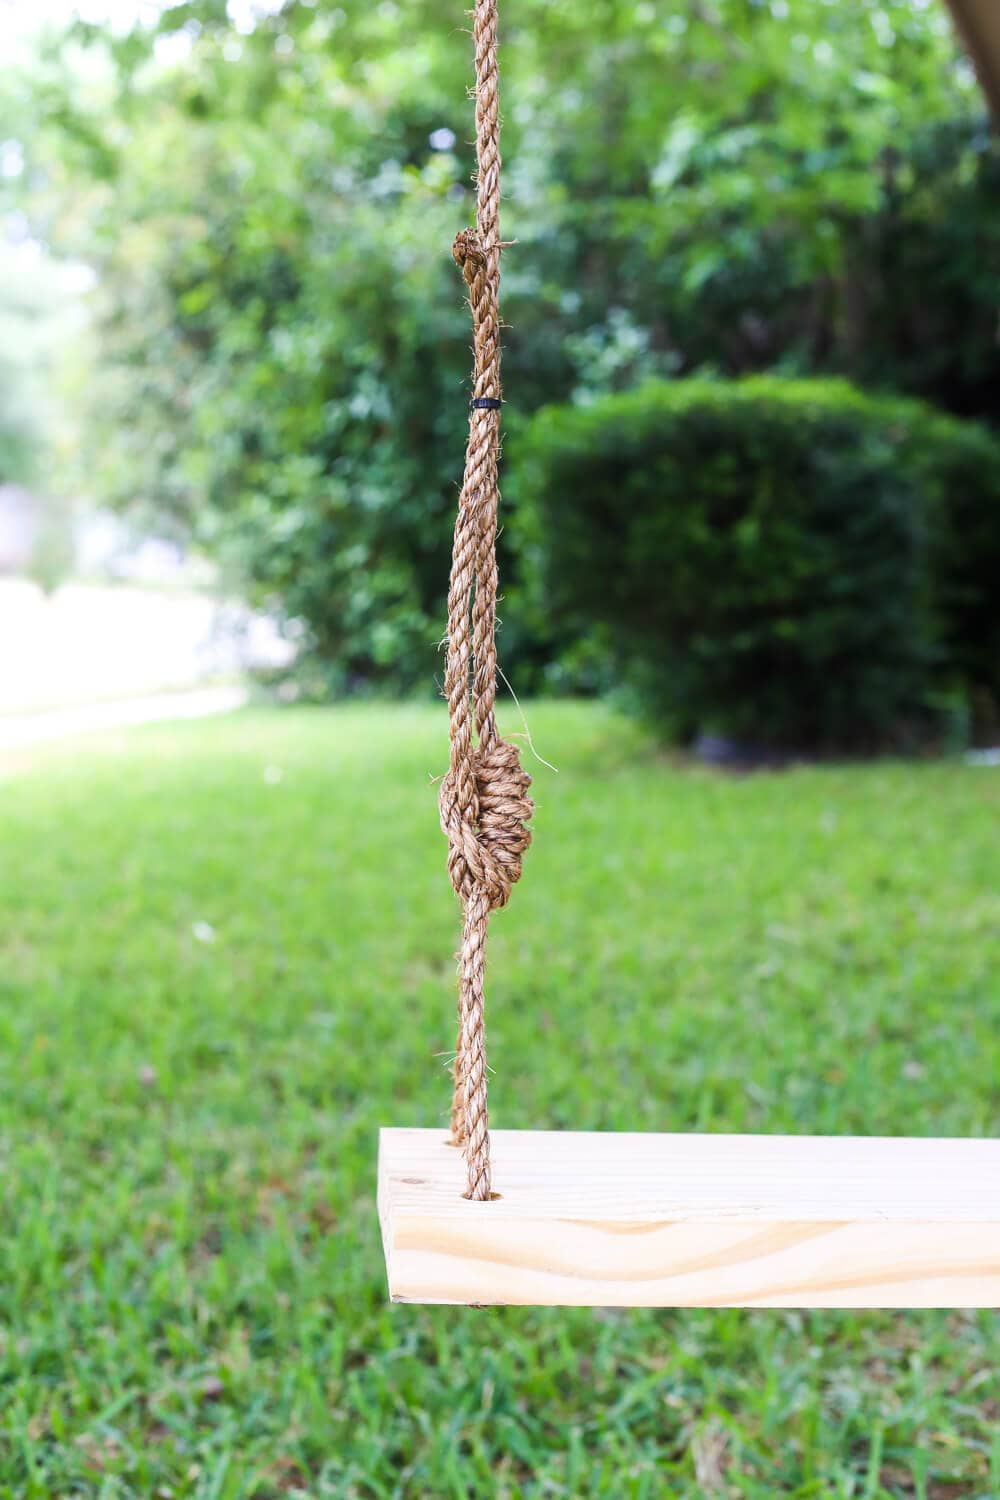 How To Make A Diy Tree Swing Love, How To Make A Wooden Tree Swing Seat